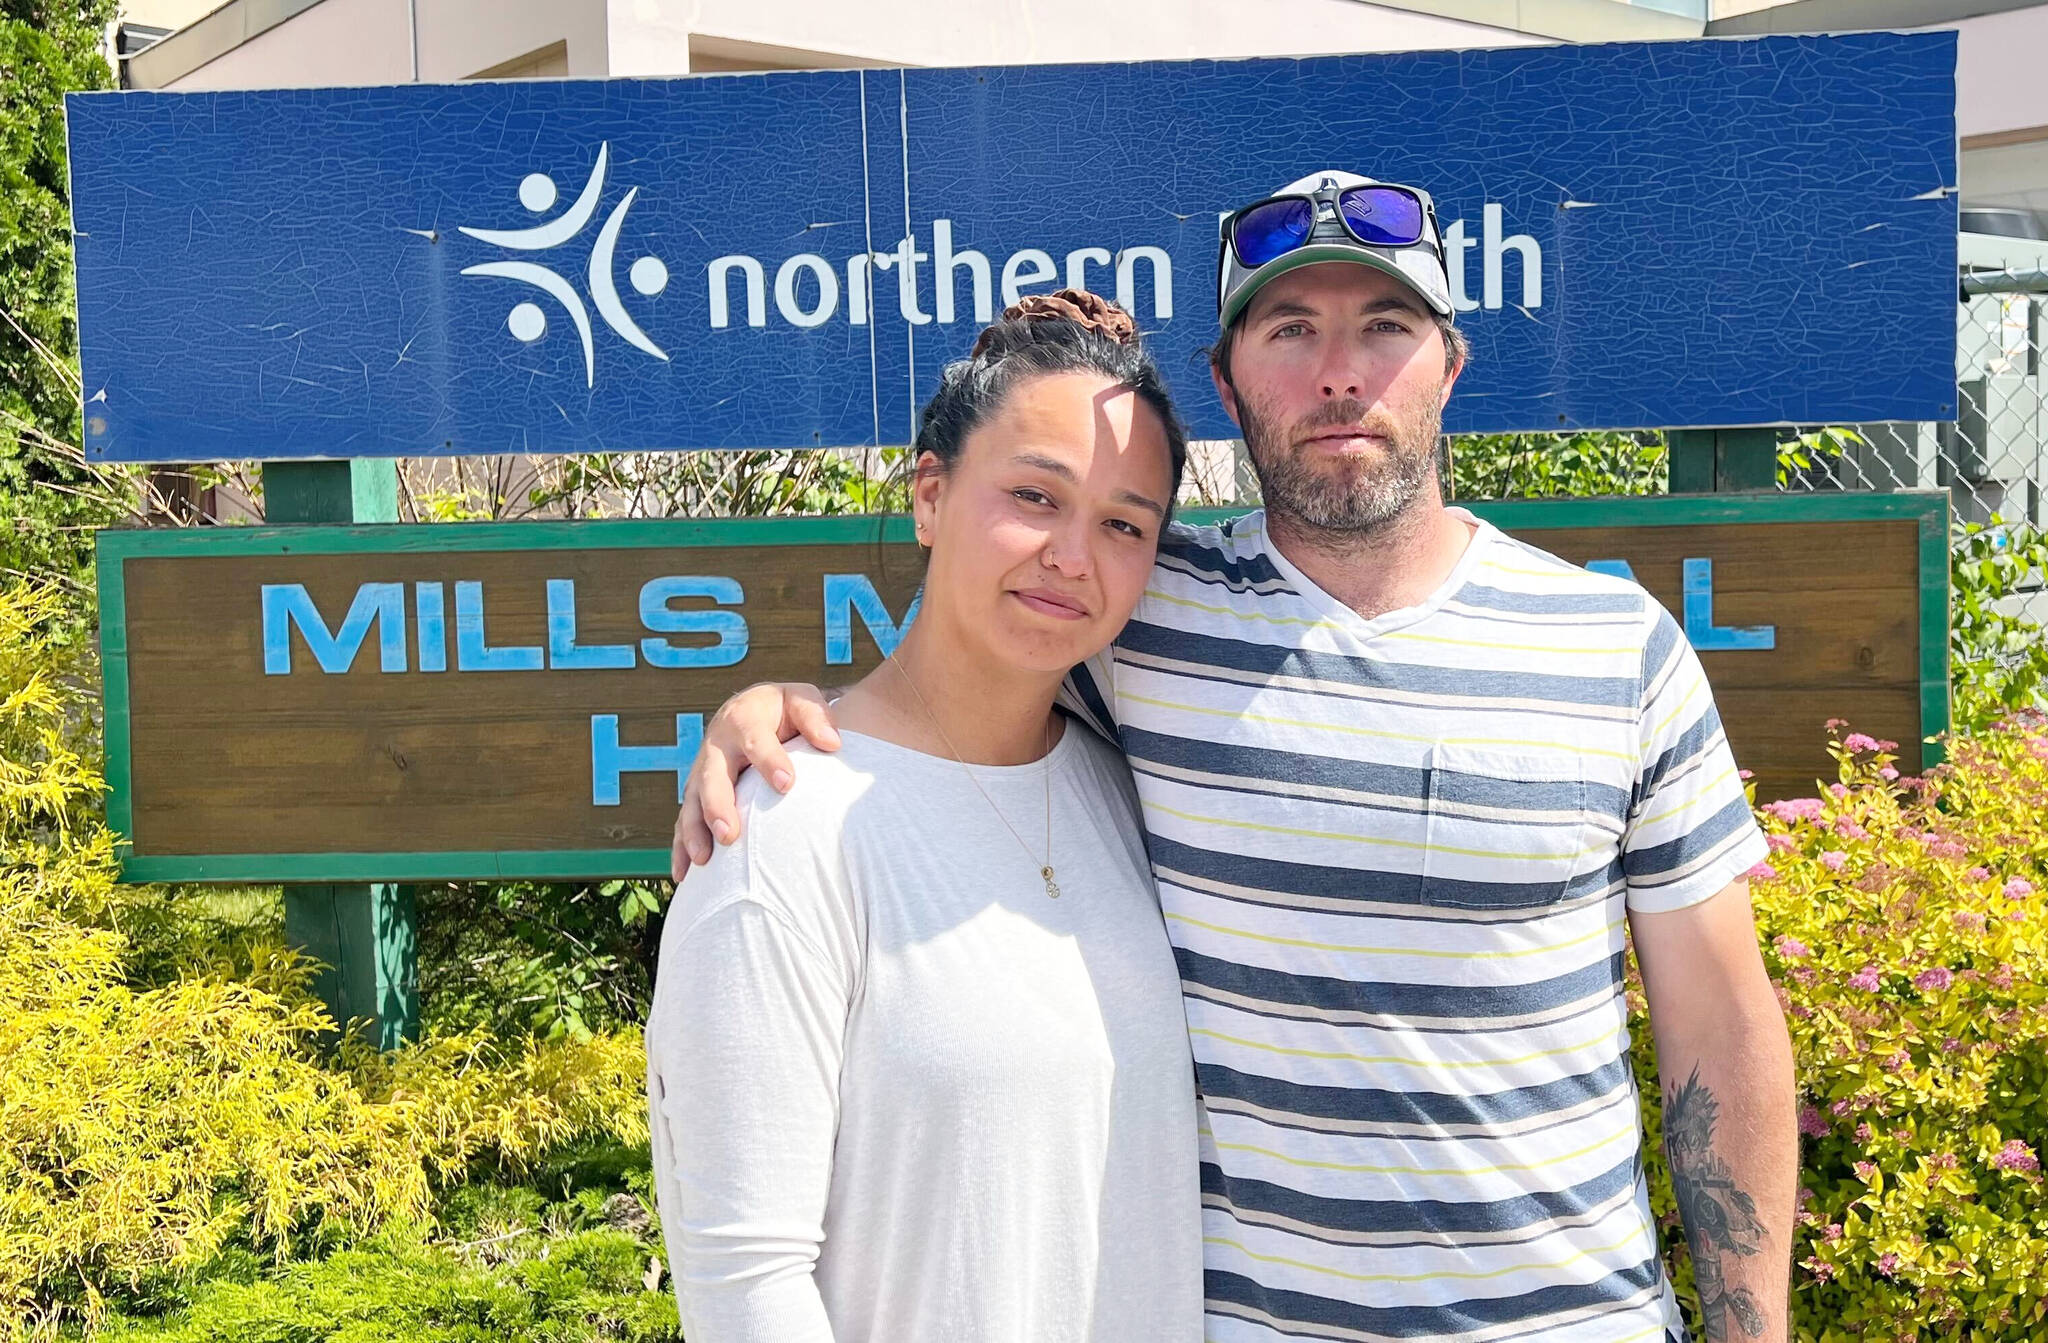 Terrace couple Lisa Seymour and Christopher England stand outside Mills Memorial Hospital. The couple is speaking out against Northern Health’s policy prohibiting guests, including partners, from being present during ultrasound scans. (Viktor Elias/Terrace Standard)